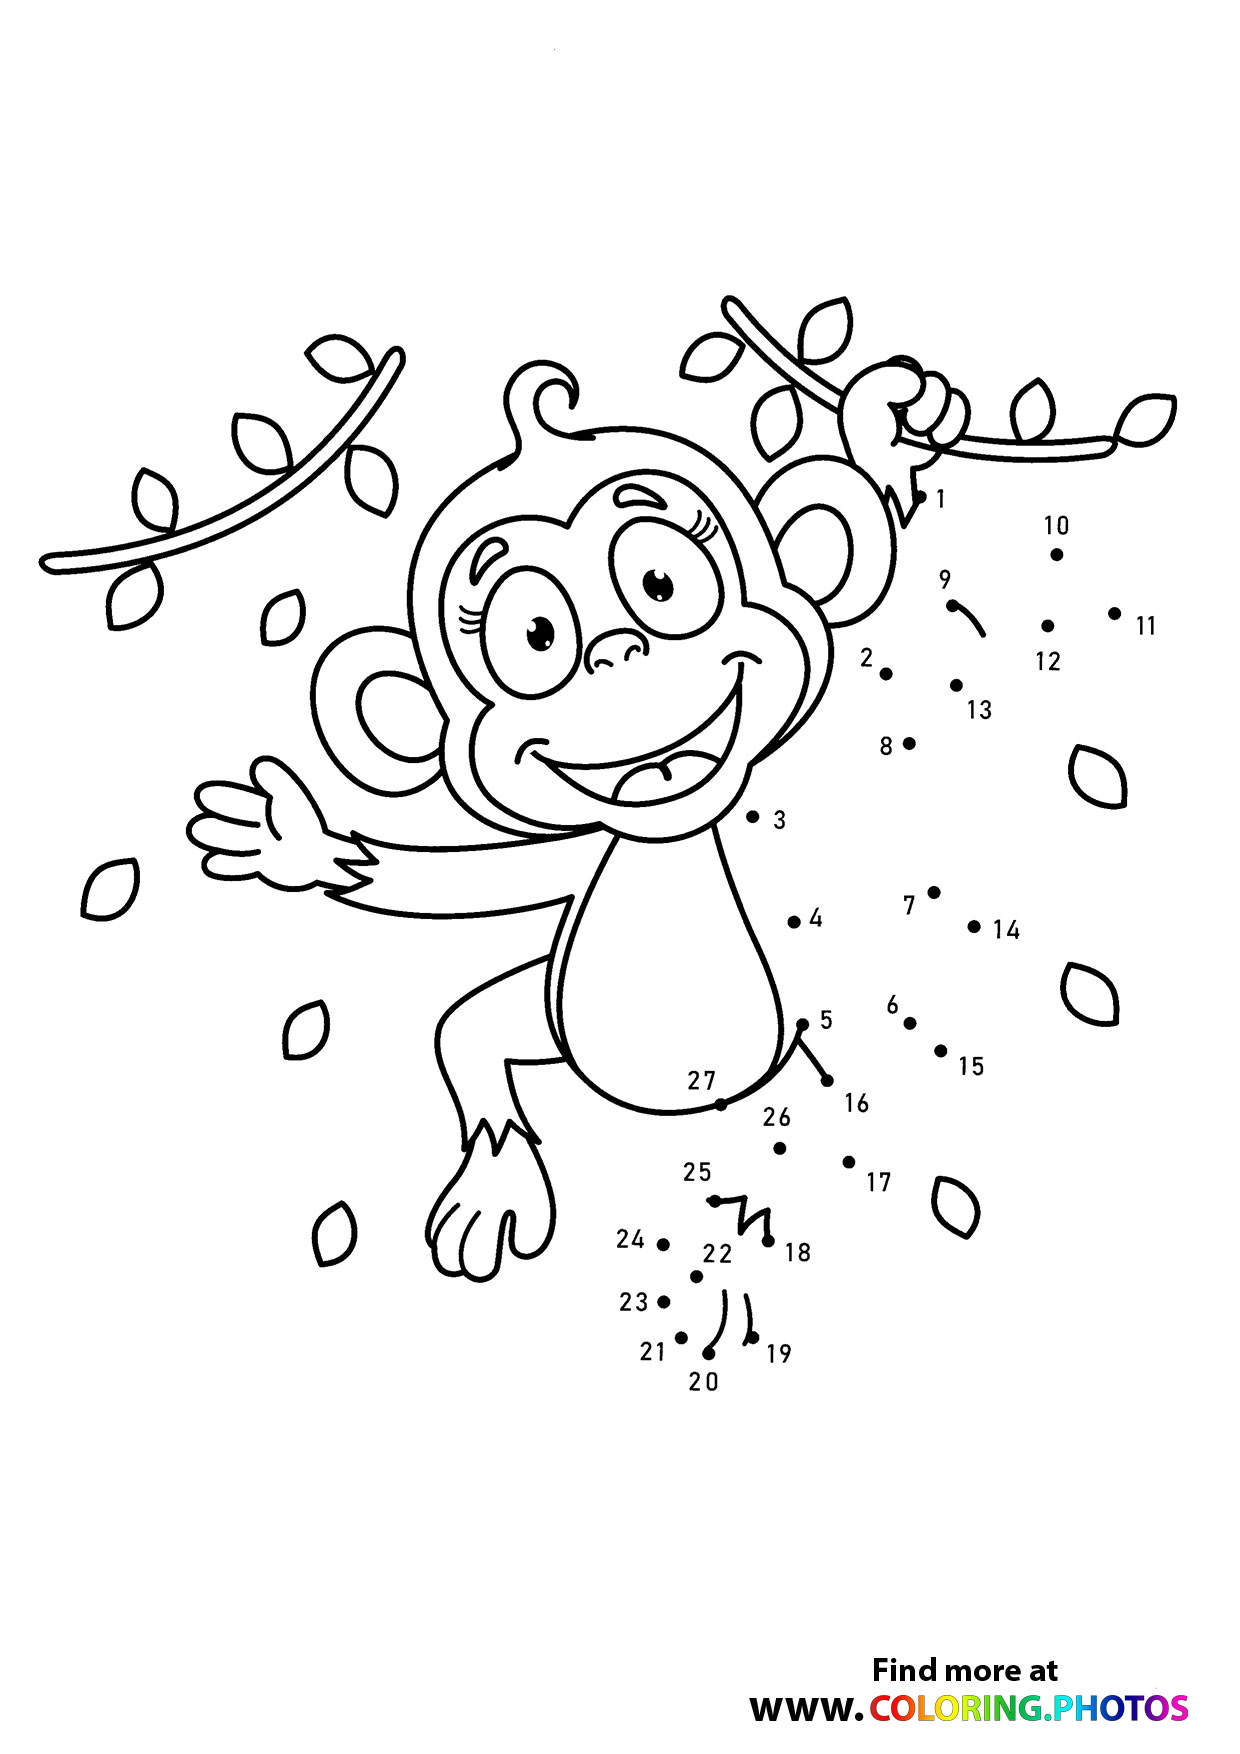 Monkey swinging dot the dots - Coloring ...